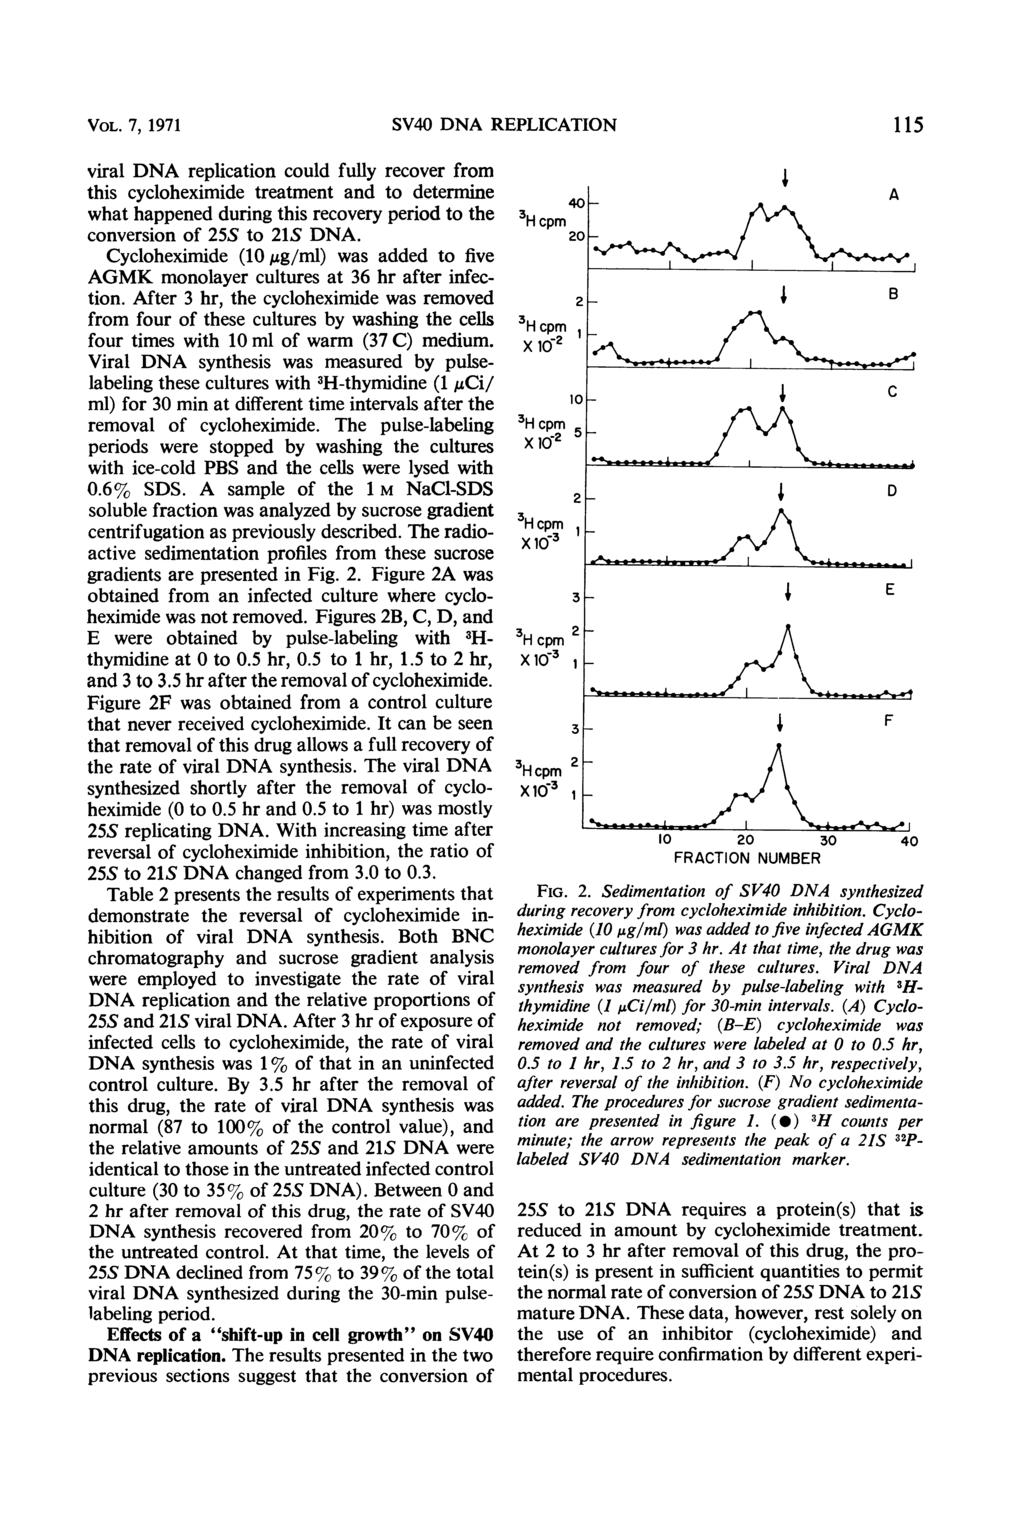 VOL. 7, 1971 SV40 DNA REPLICATION viral DNA replication could fully recover from this cycloheximide treatment and to determine what happened during this recovery period to the conversion of 255 to